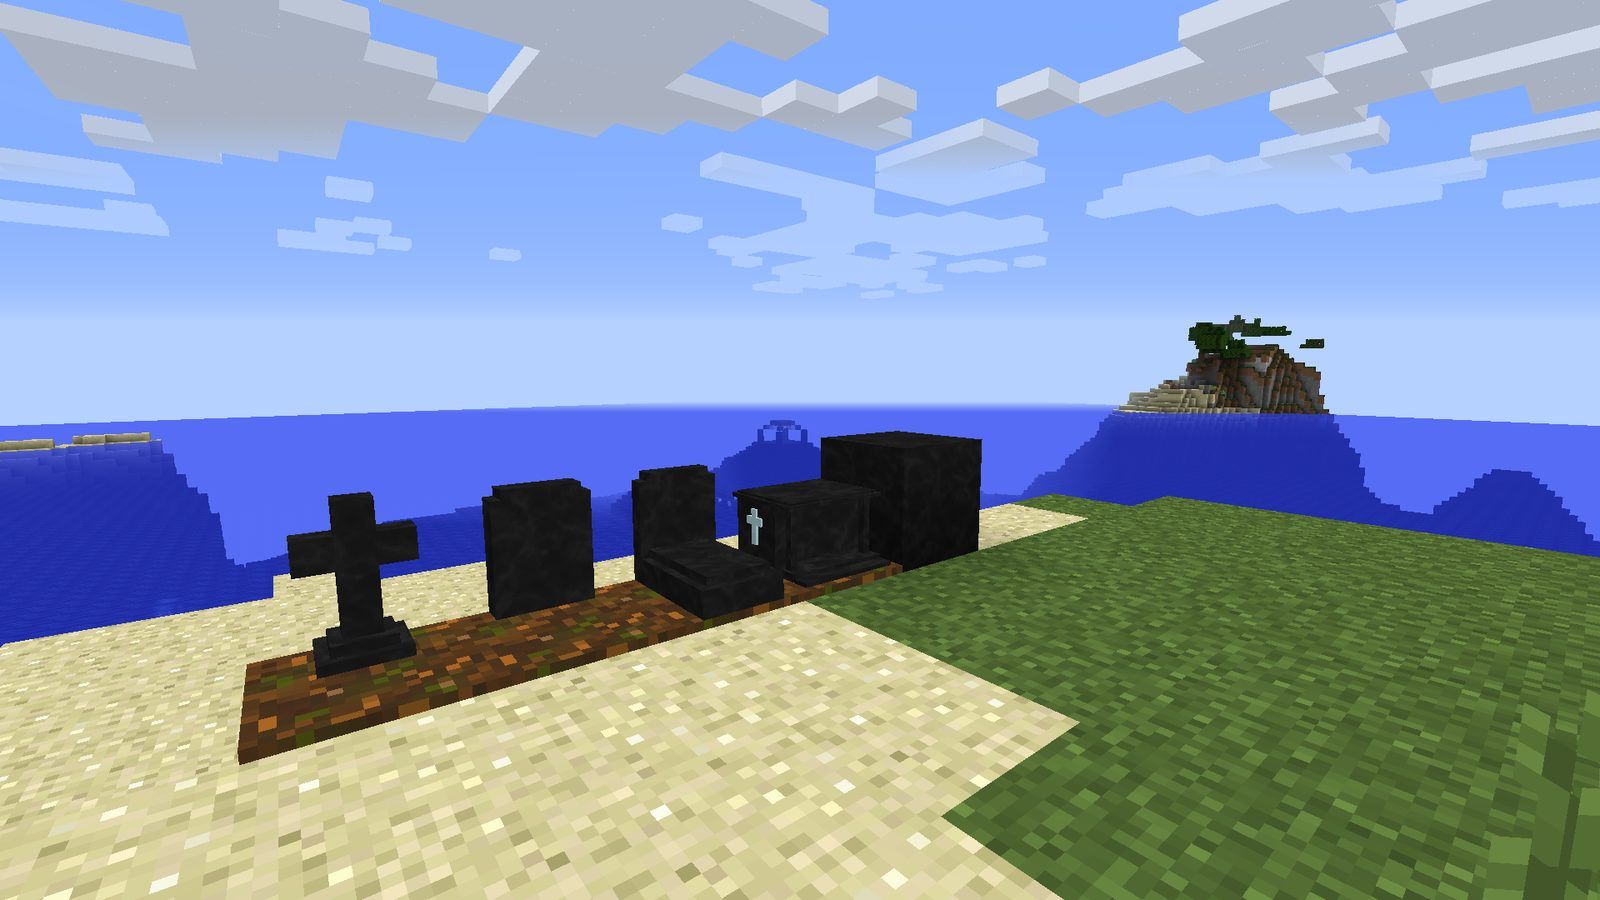 Corail Tombstone mod for Minecraft 1.12.2 all of your items